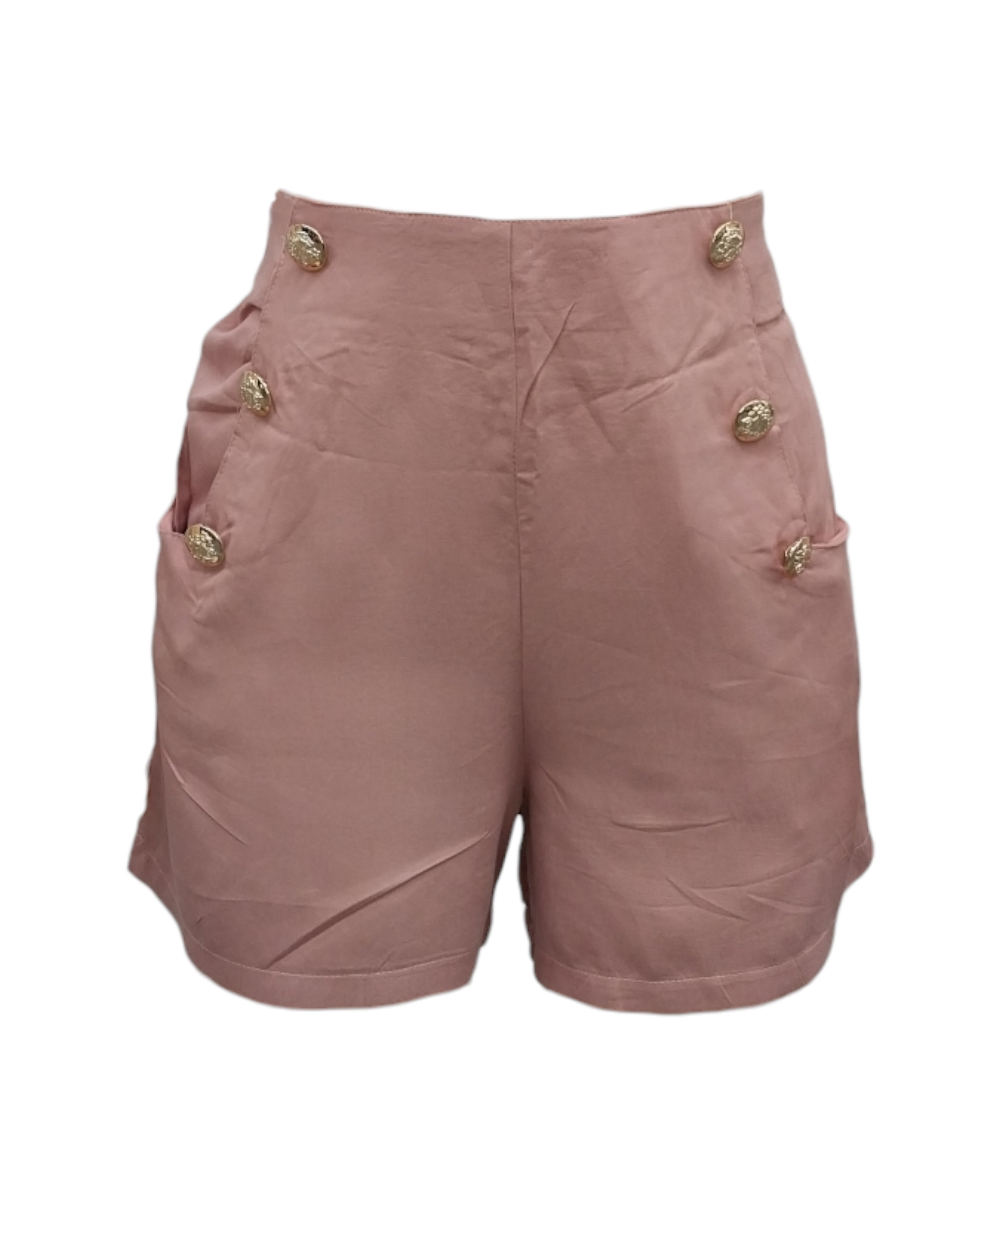 Shorts Casuales Cafe7